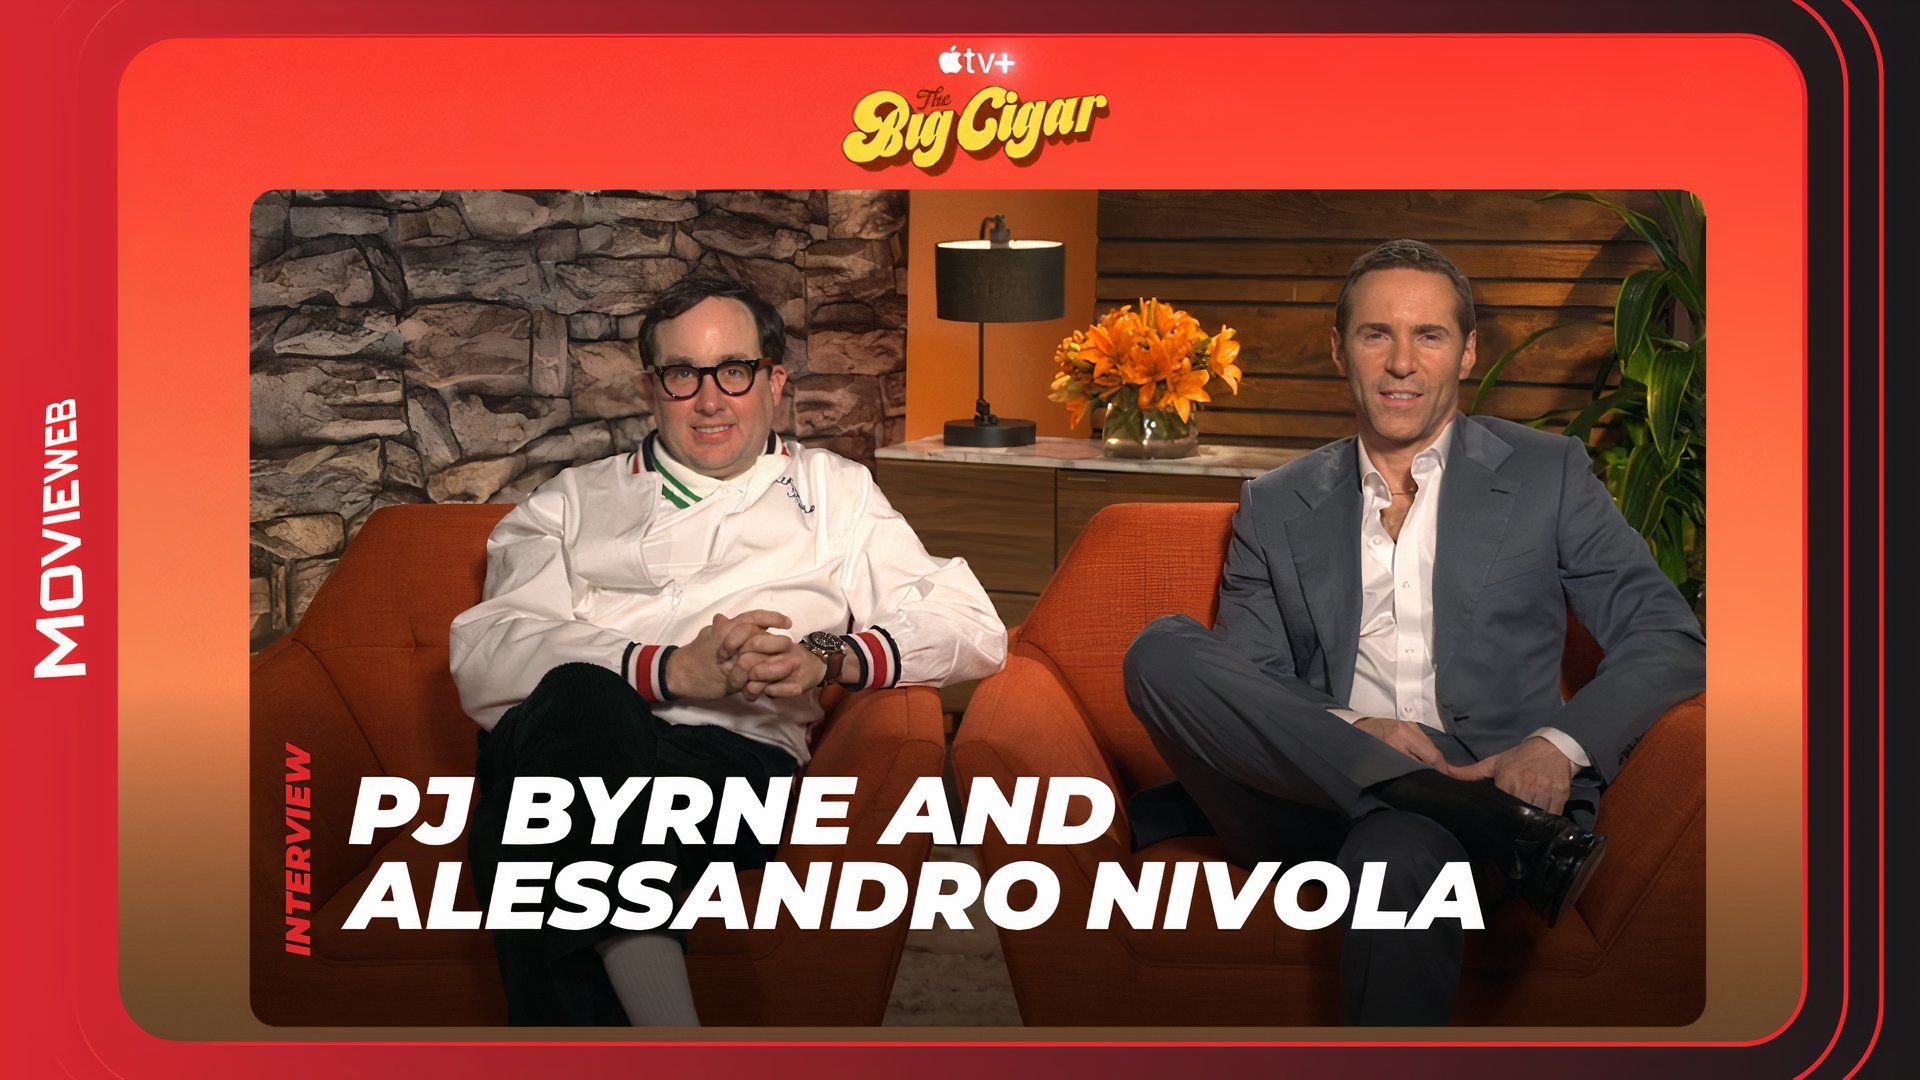 The Big Cigar - PJ Byrne and Alessandro Nivola Interview